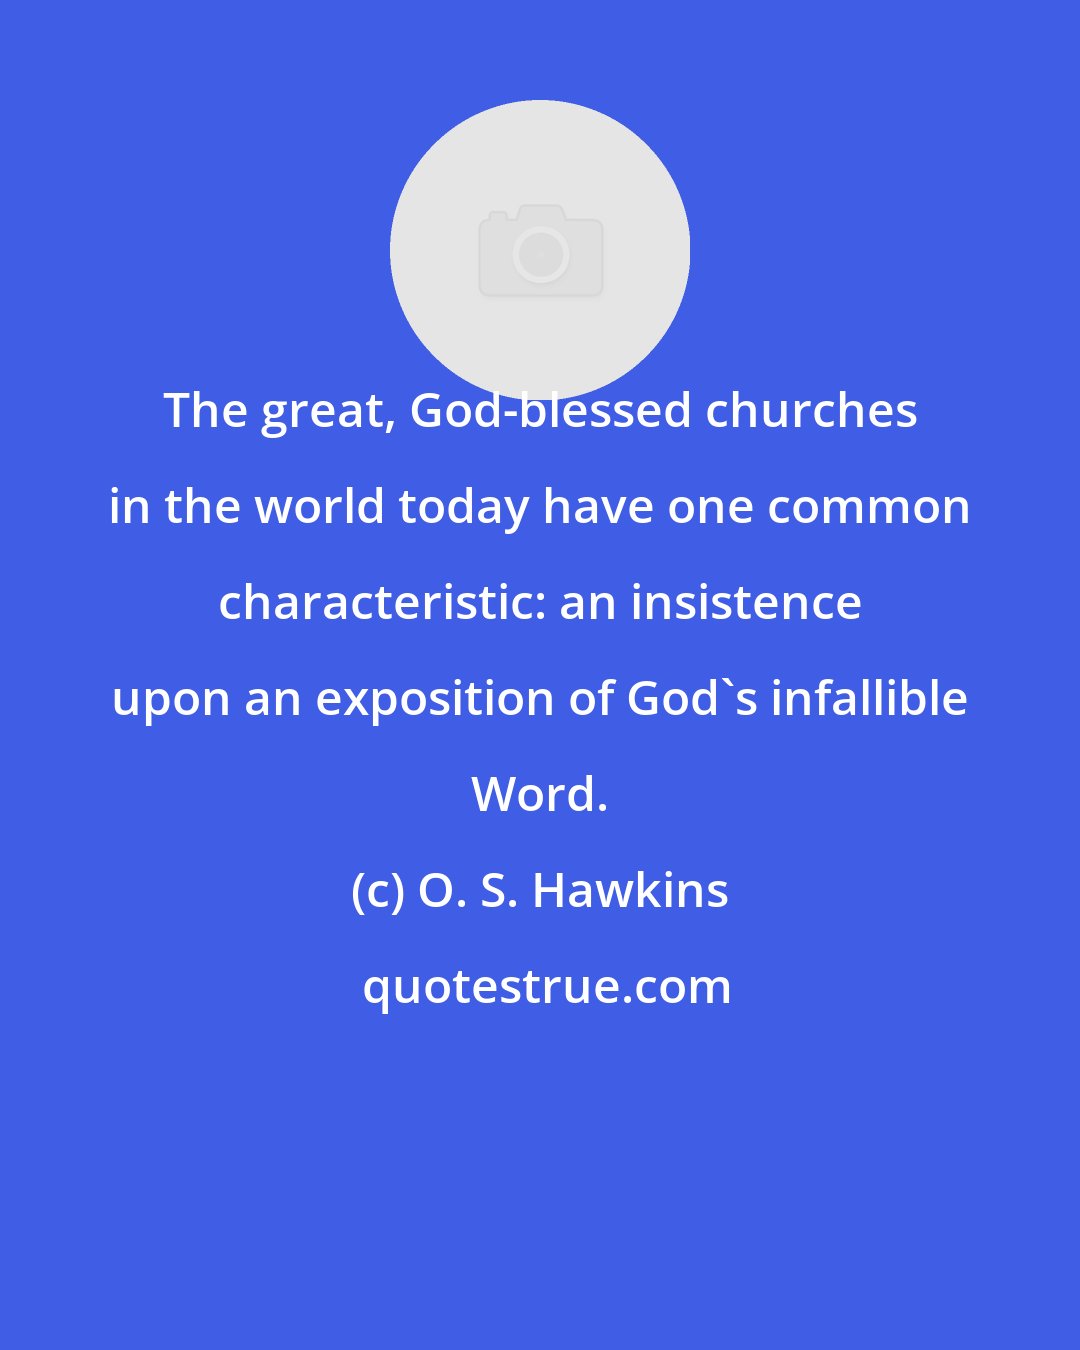 O. S. Hawkins: The great, God-blessed churches in the world today have one common characteristic: an insistence upon an exposition of God's infallible Word.